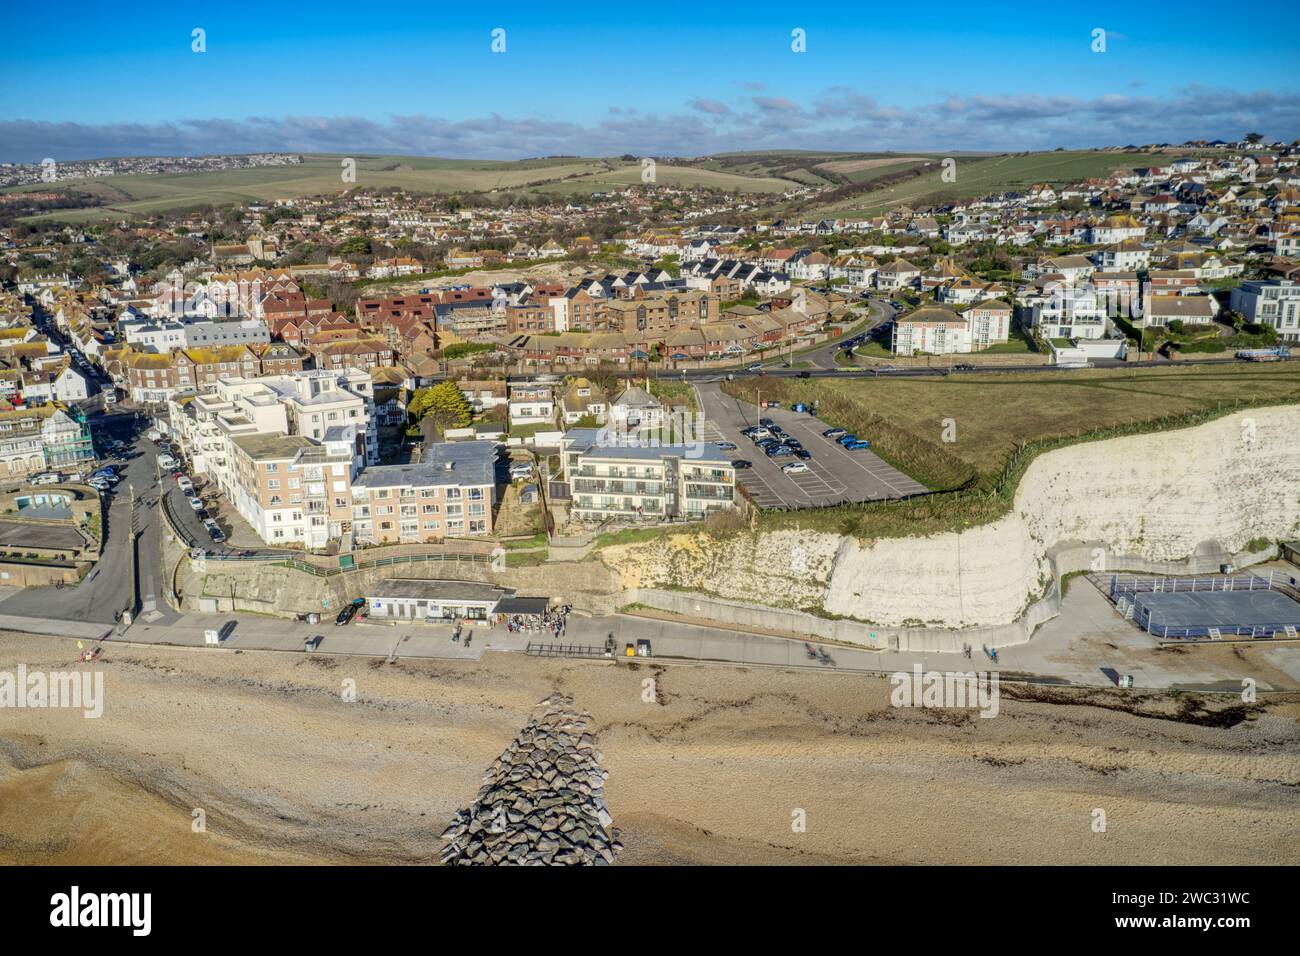 Rottingdean village in East Sussex, aerial view of the high street looking towards the centre of the village, with the south downs in the background. Stock Photo